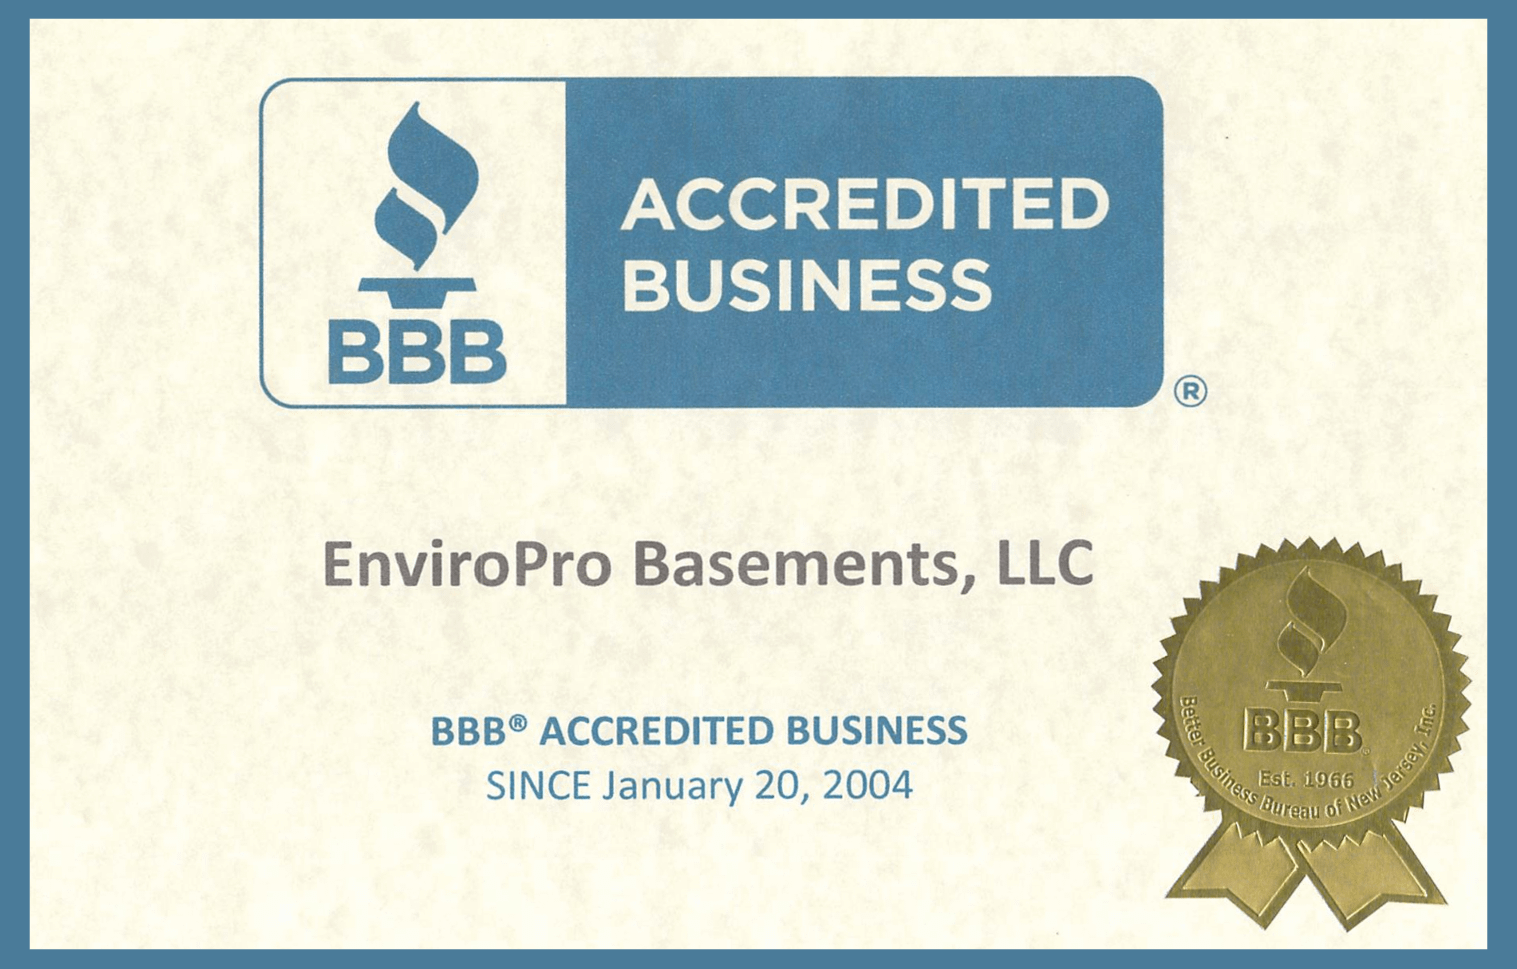 BBB Accredited Business since 2004 